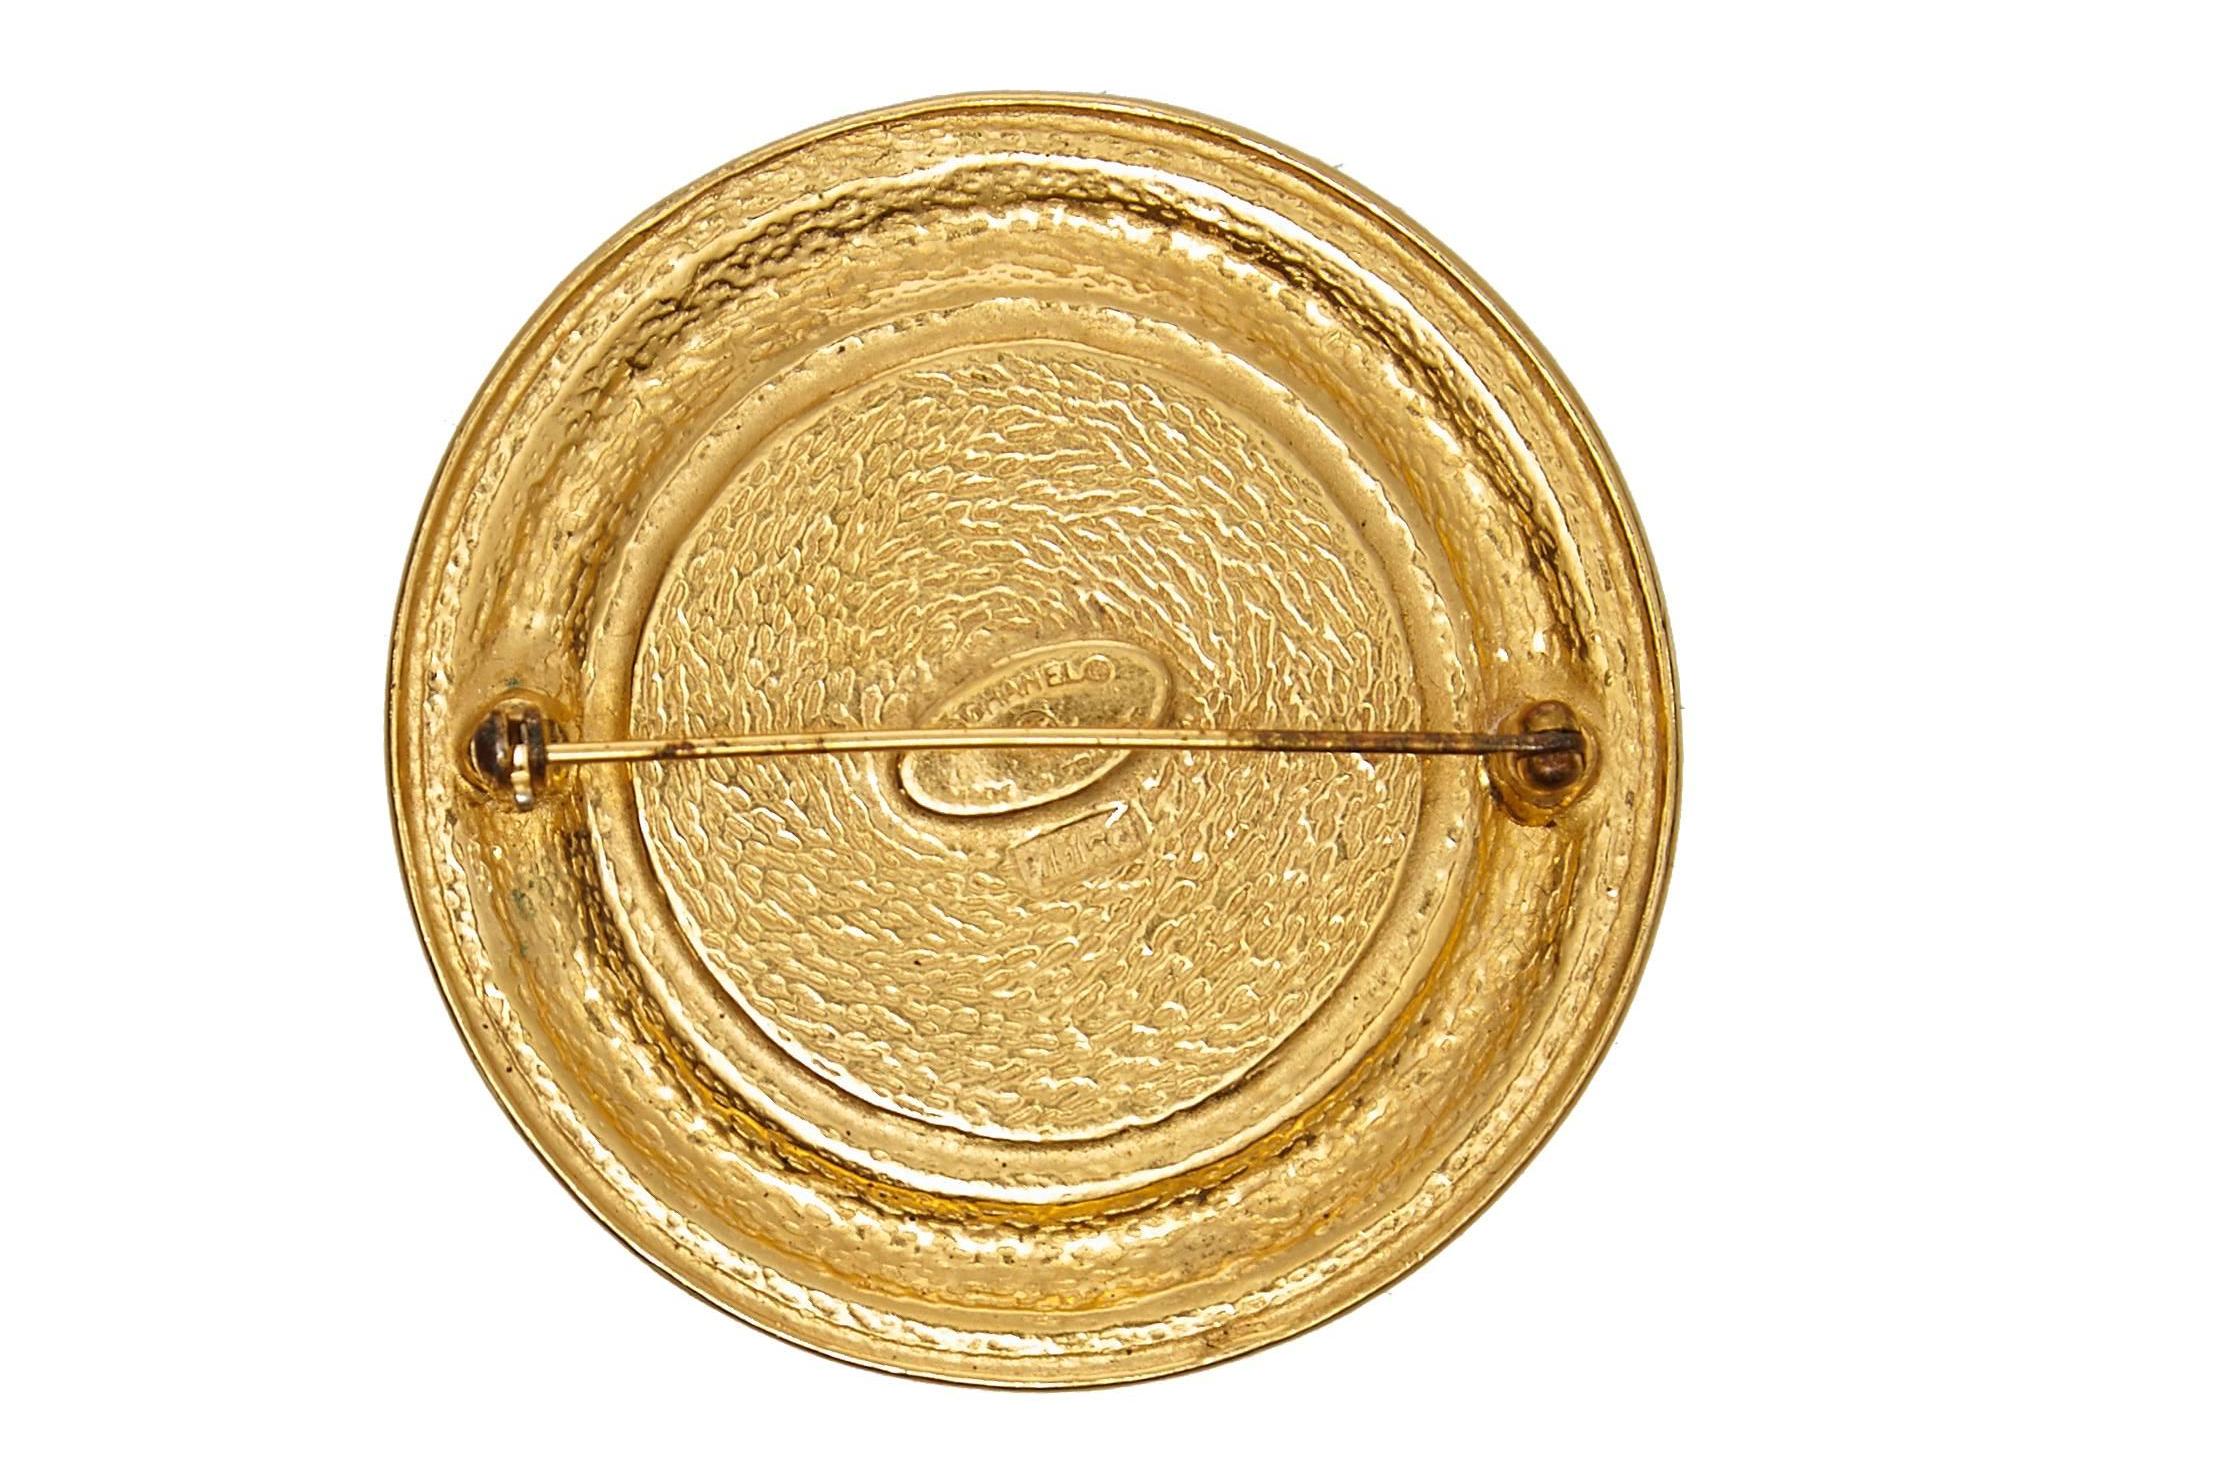 A stylish 1980s Chanel gold plate medallion brooch with the front door details of the Paris boutique where it all began at 31 Rue Cambon.  Signed with the Chanel oval cartouche on the back, made in Paris and numbered 1150.  The brooch is medium